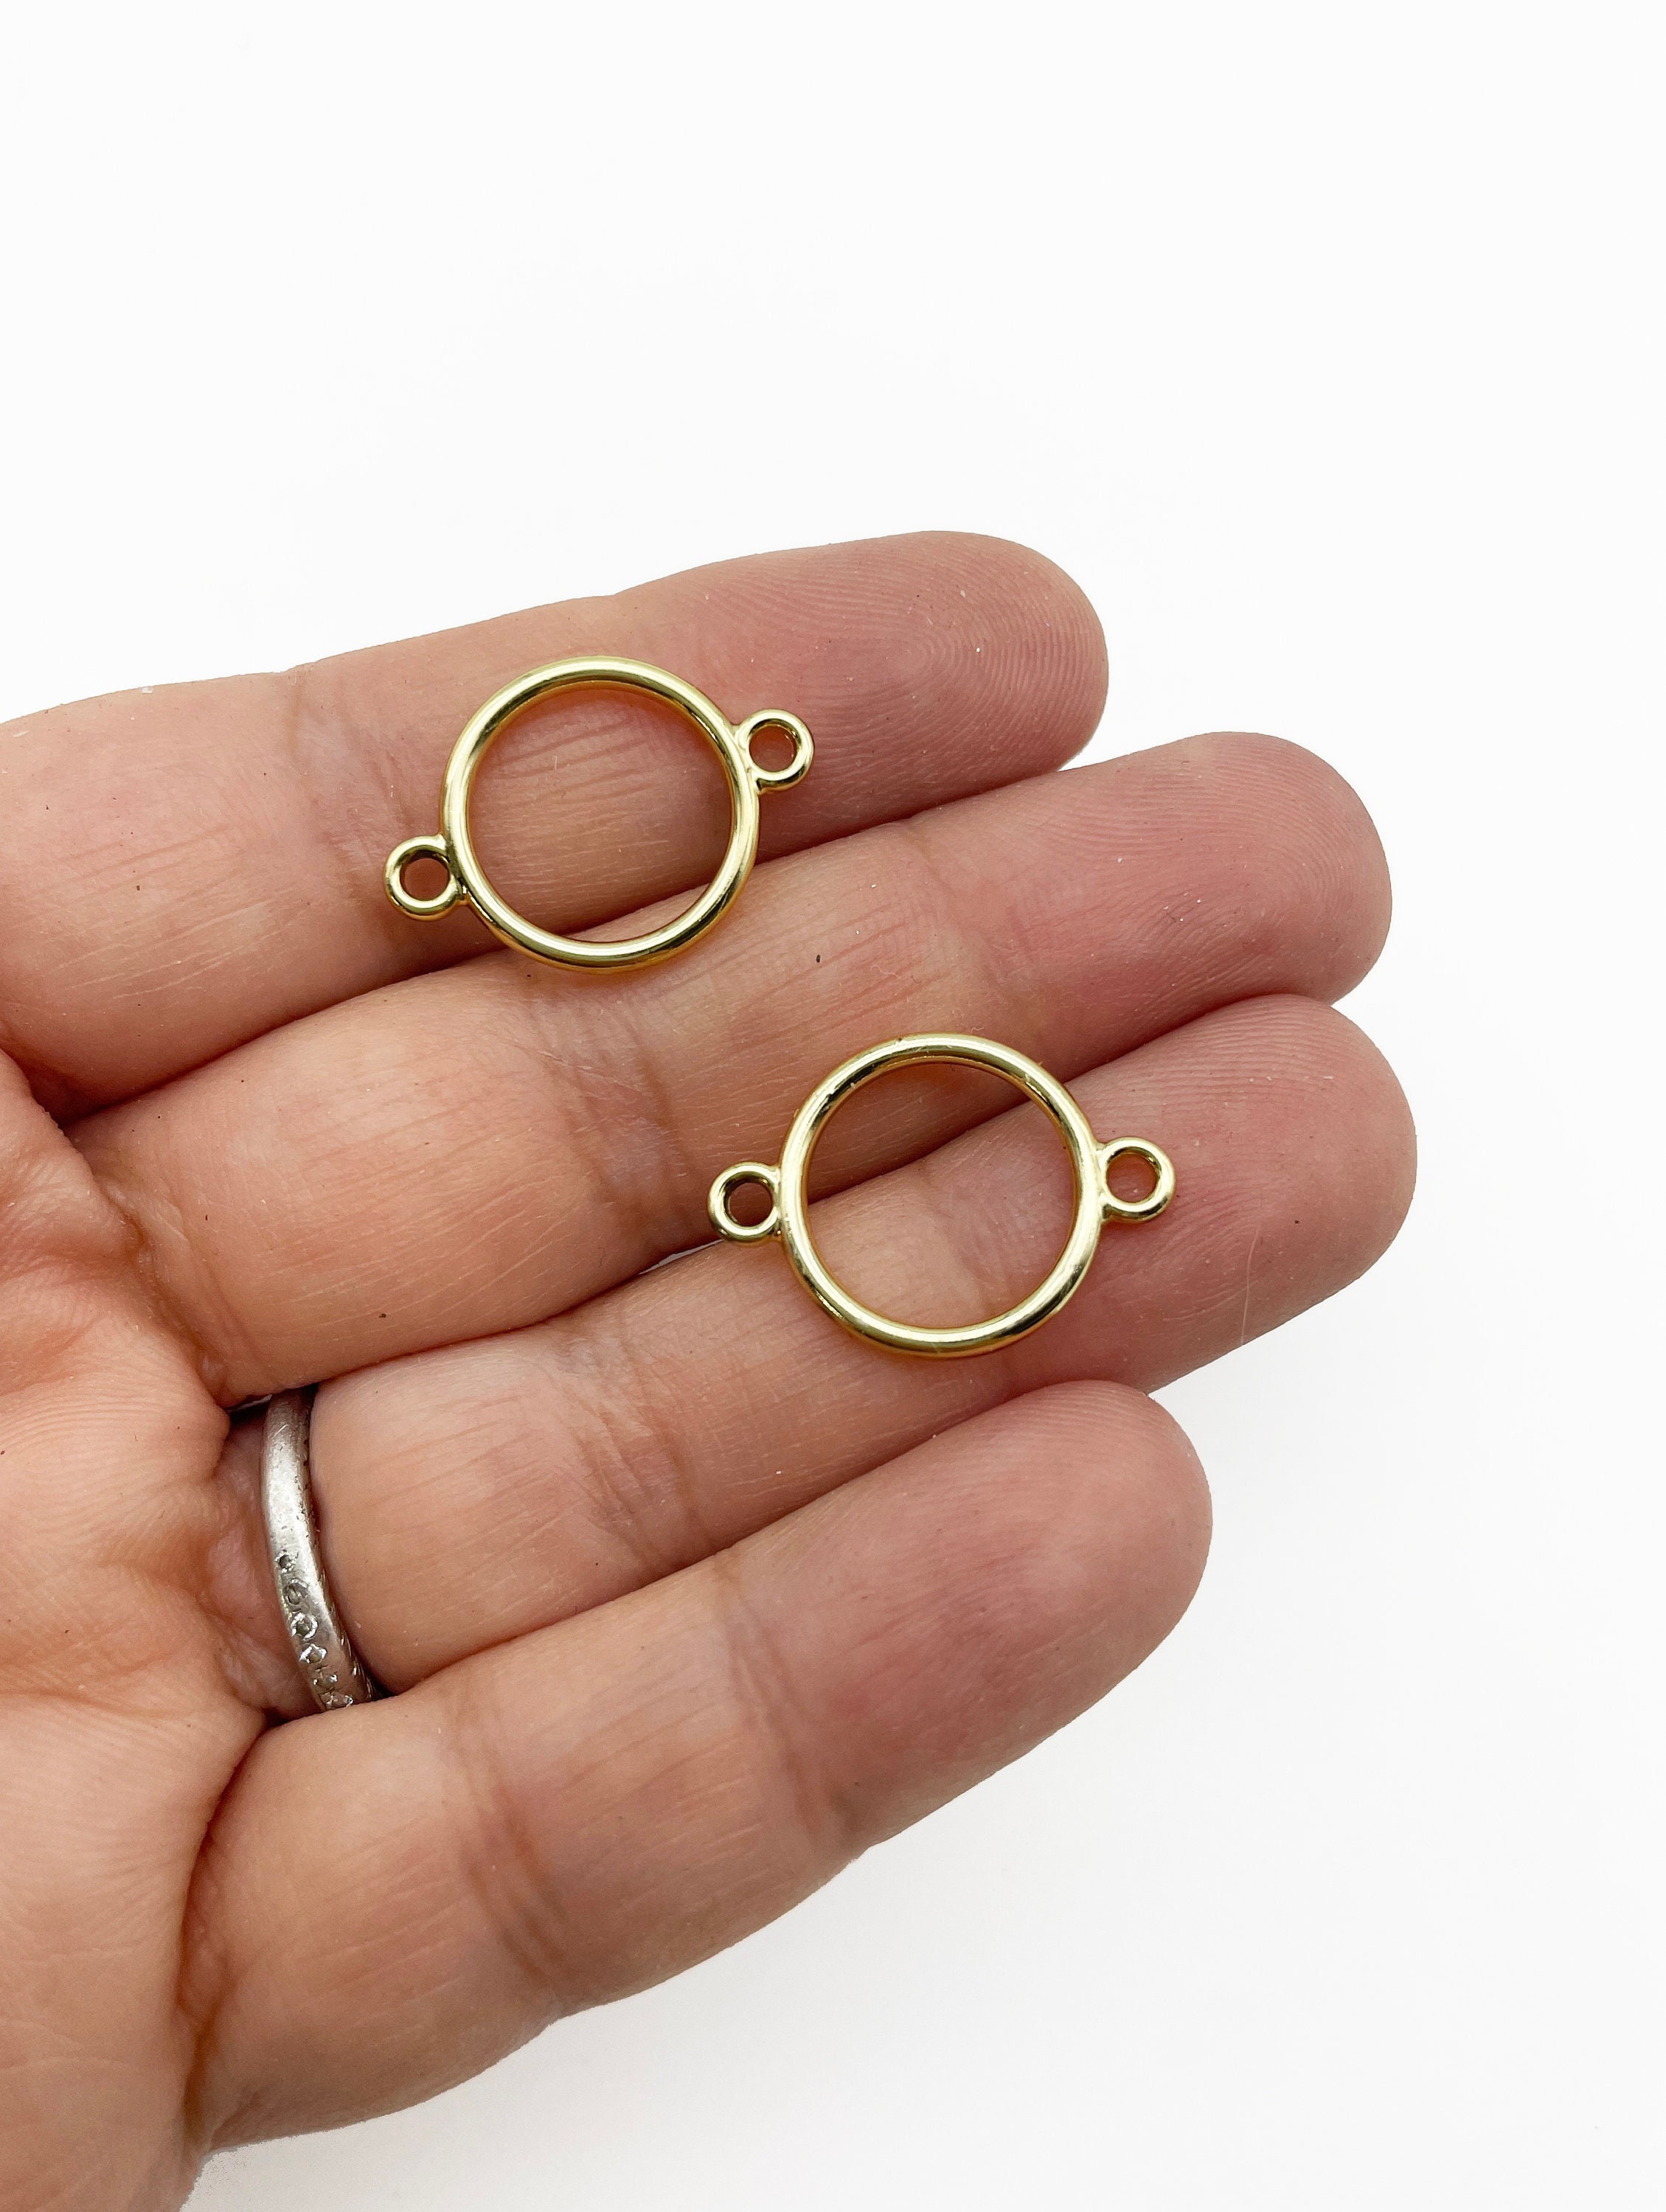 Findings For Jewelry Making  Open Double Circle Ring Shaped Copper  Components